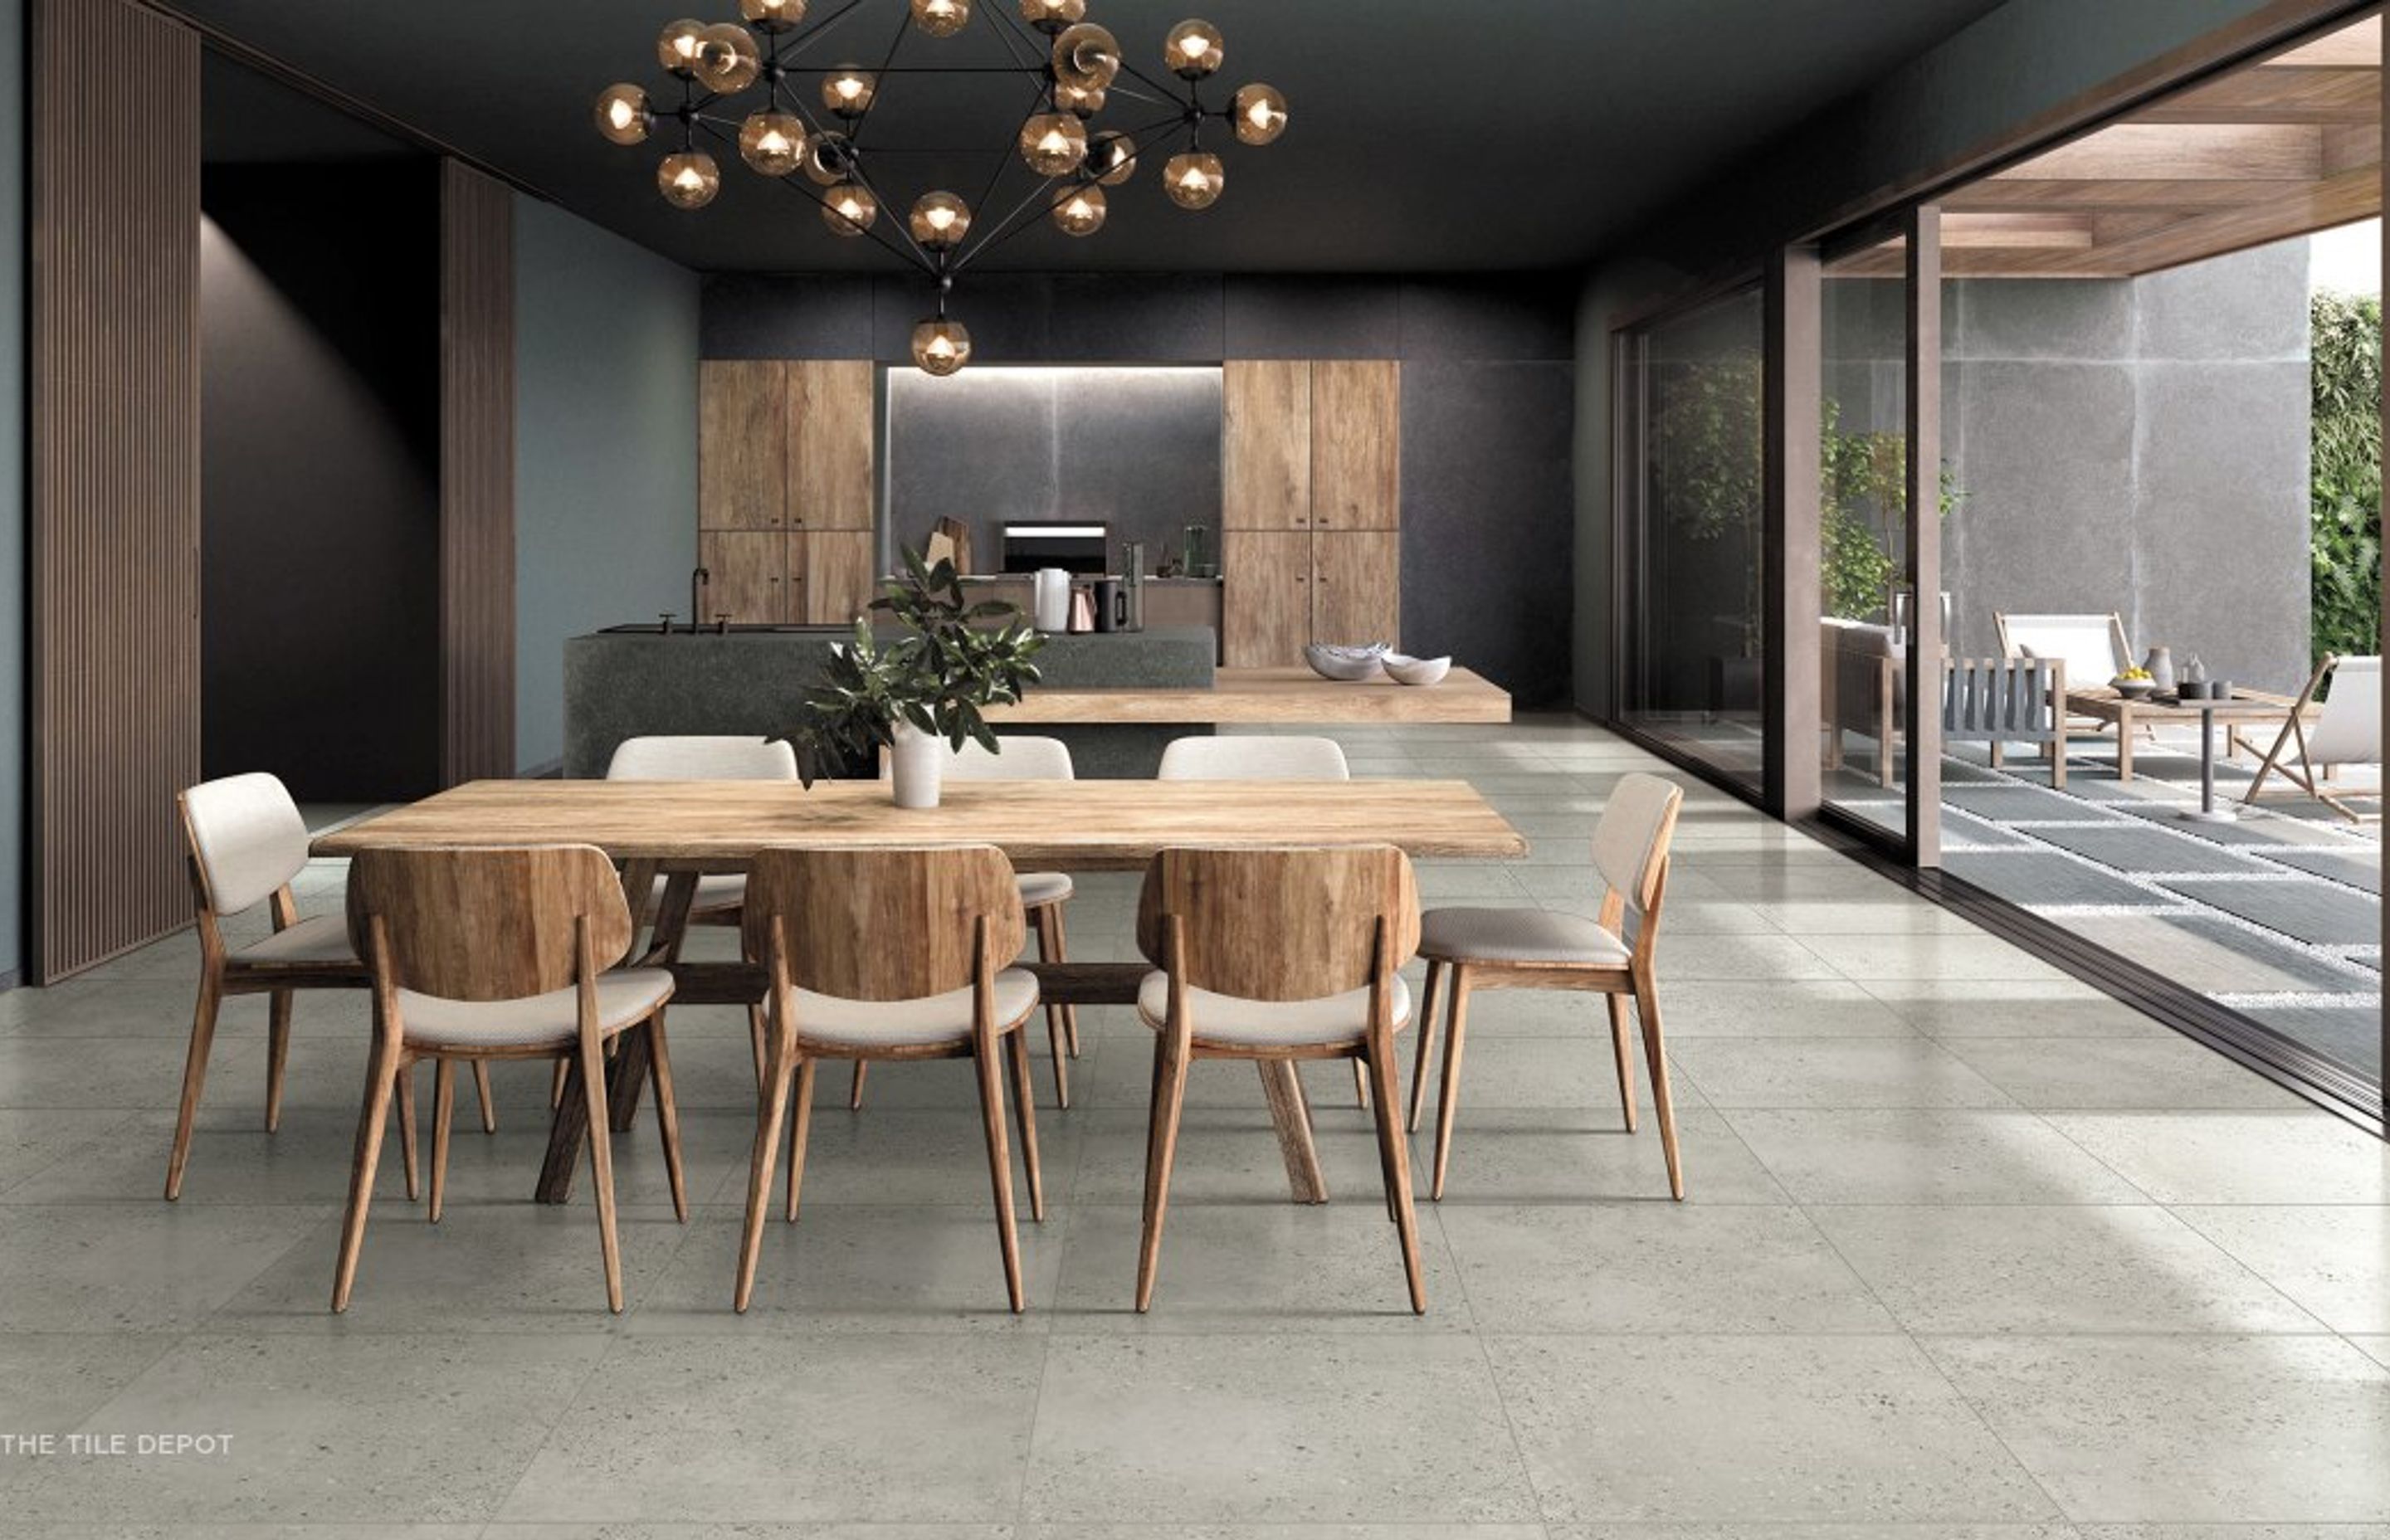 These glazed porcelain tiles give a high end natural stone look because of their grey matte finish. The appearance of grout lines is also minimal because the grout lines are very thin and almost match the colour of the tiles. (Porfido collection, Tile Dep